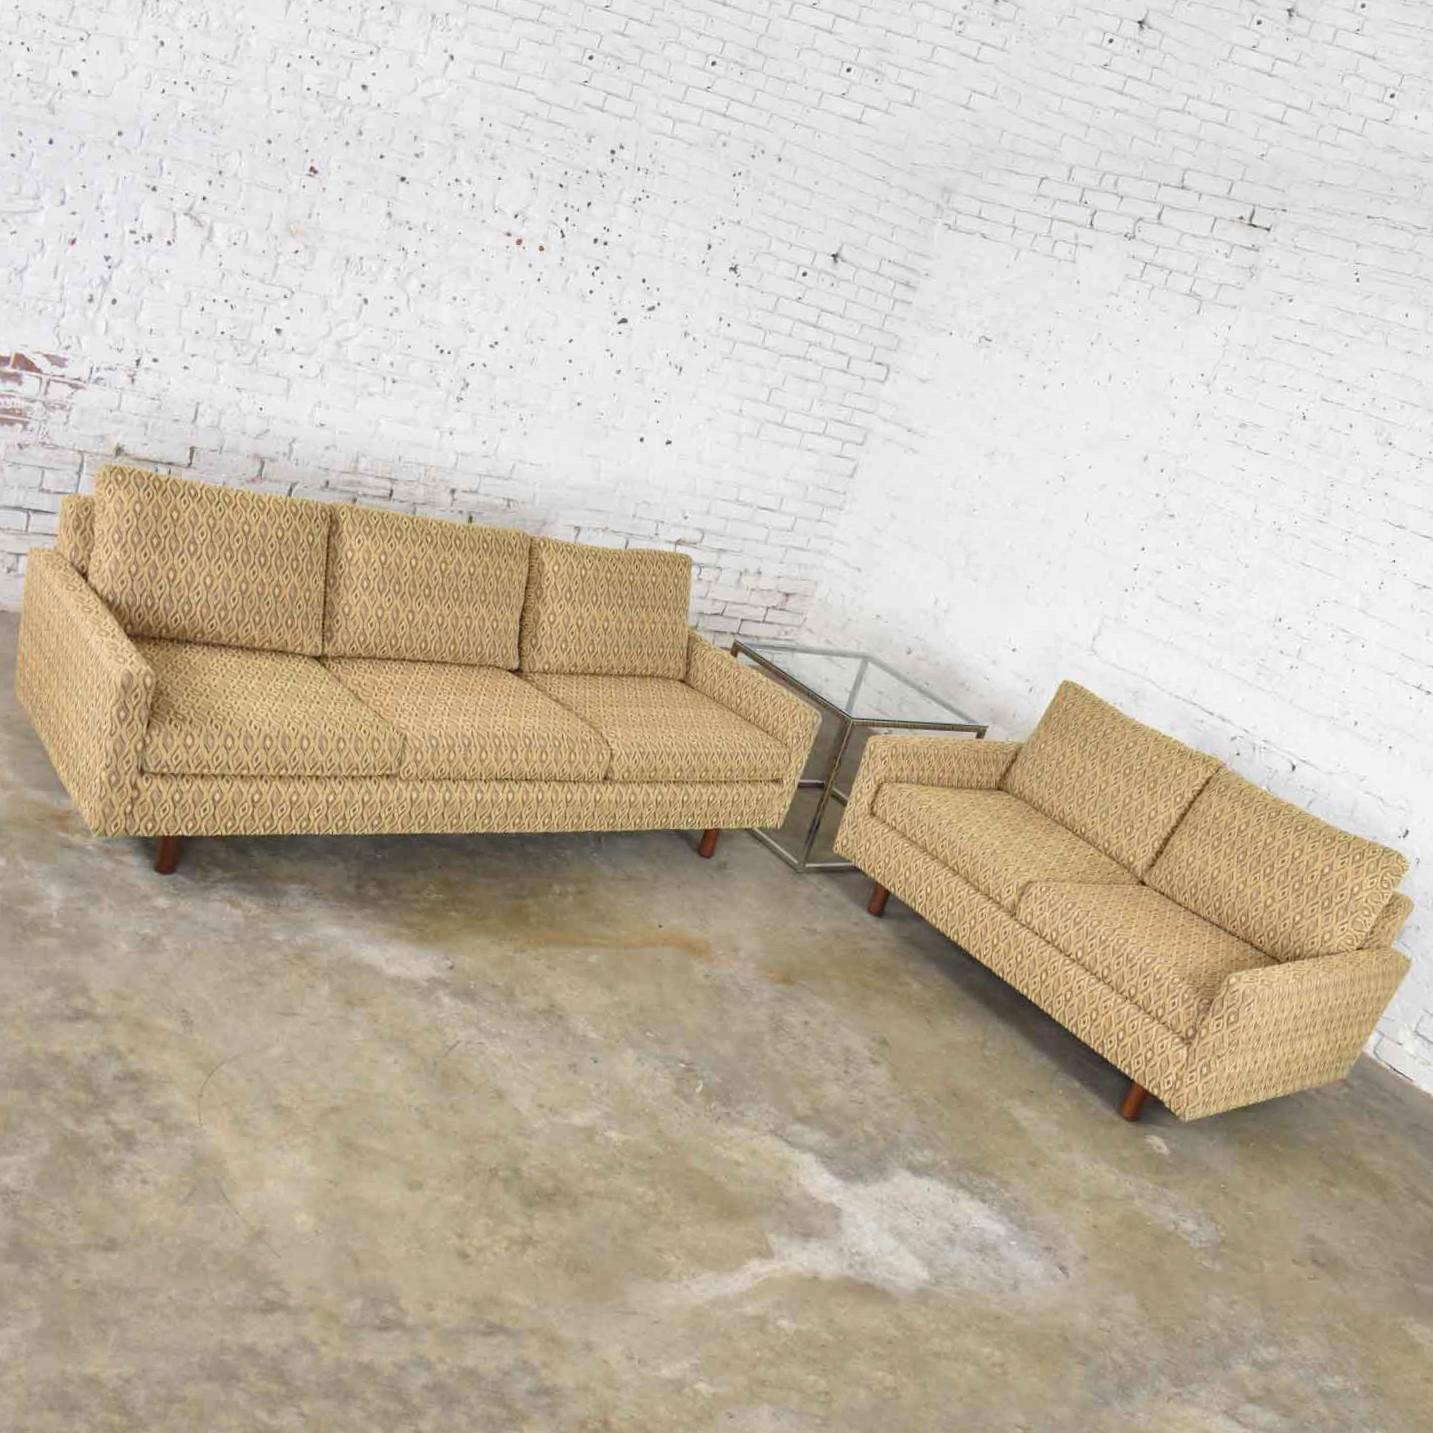 Handsome pair of Lawson style sofas, one three-cushion sofa and one two-cushion love seat, upholstered in a beautiful gold small geometric pattern. Styled after famed designer Harvey Probber with his signature cylindrical walnut feet. They are in